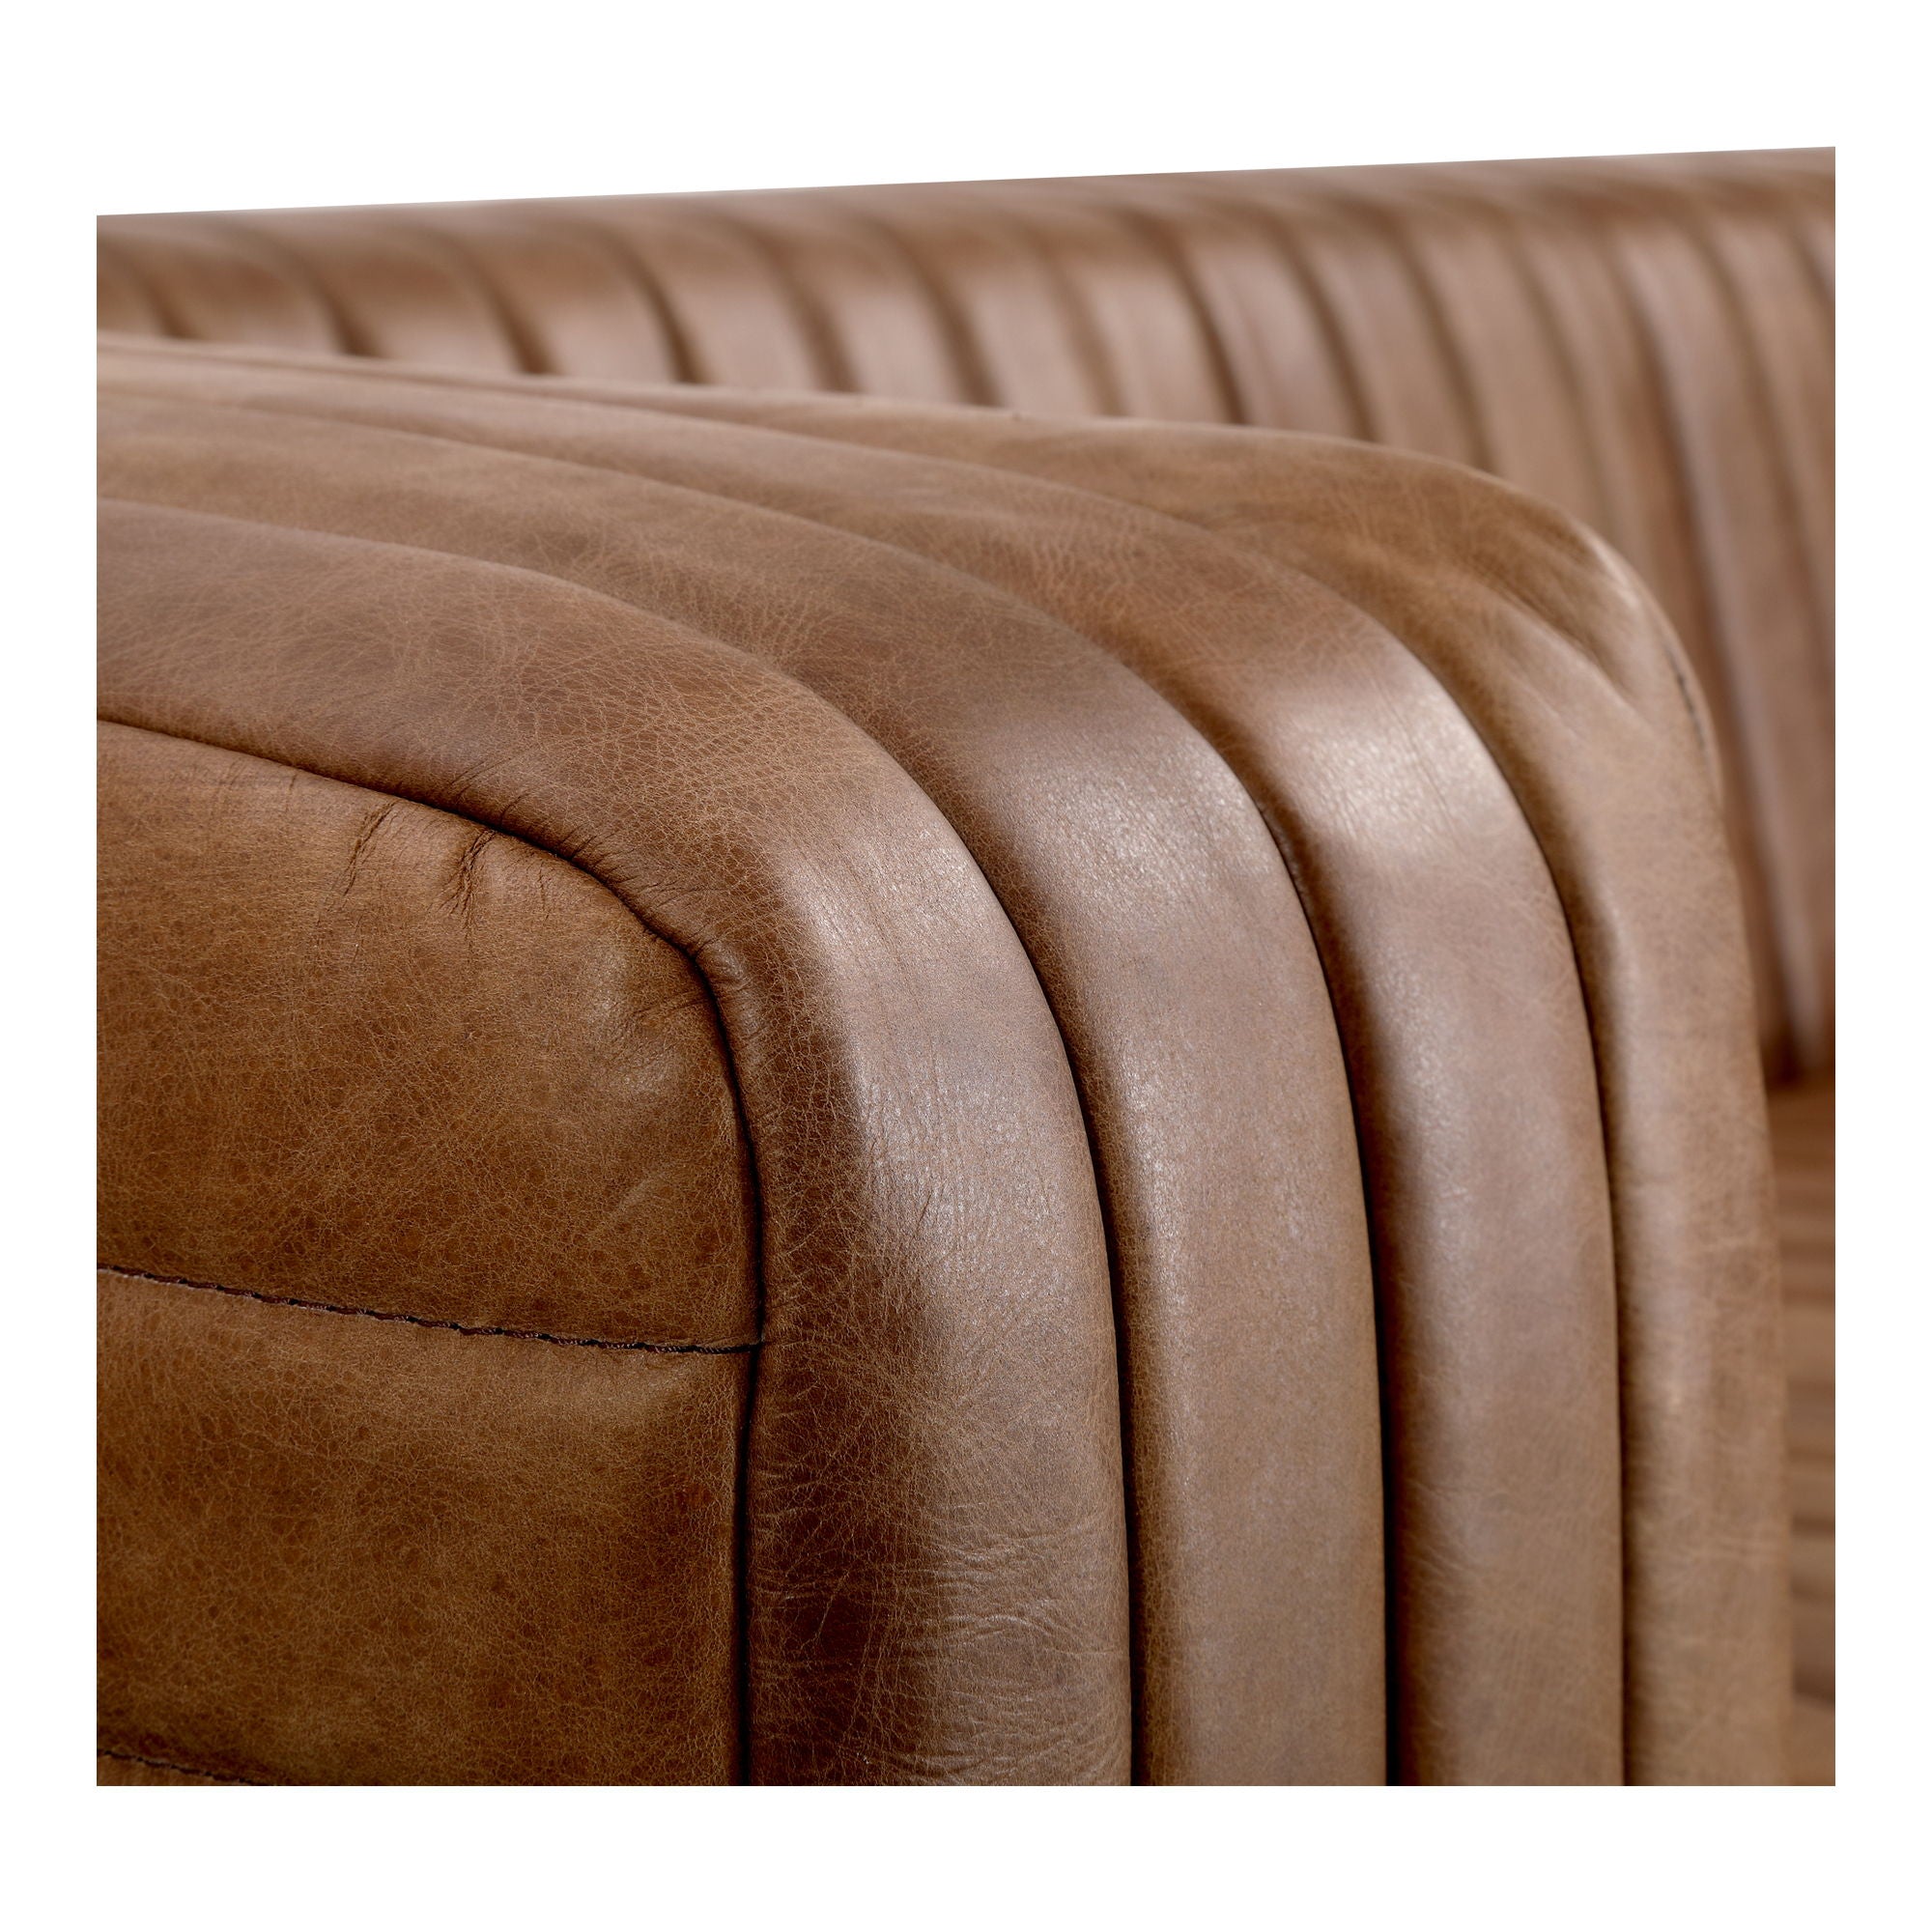 Castle Sofa - Light Brown Top-Grain Leather - Channel-Stitched Design - Stylish Living Room Furniture